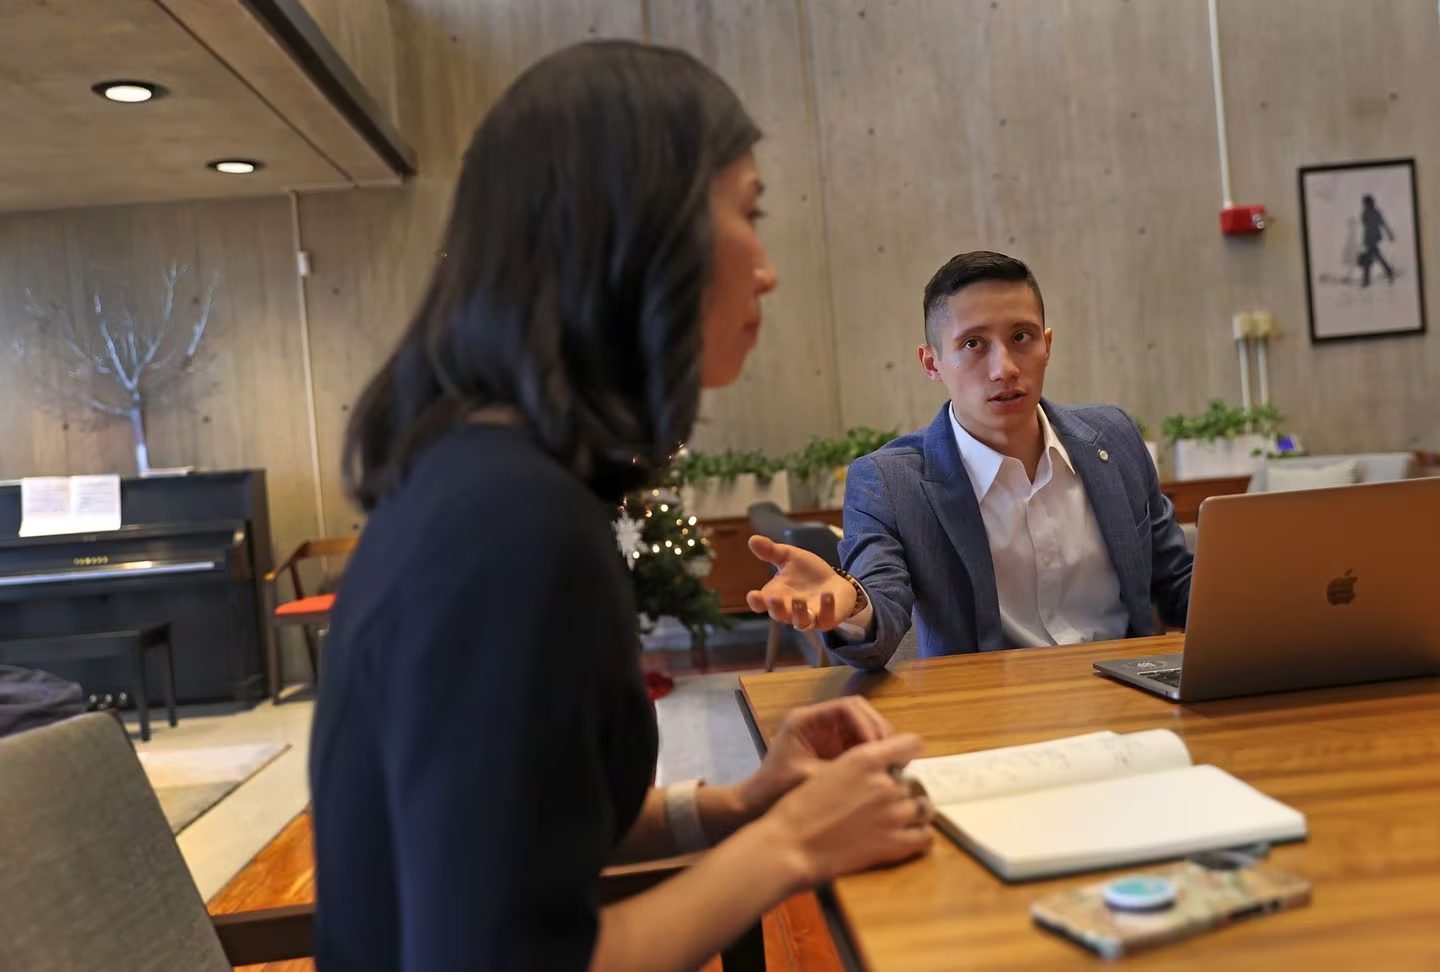 WWW alum and Mayor Michelle Wu's director of speechwriting, Ezra Zwaeli, took part in a brainstorming session in the mayor's office to discuss the video montage that will run during the event.